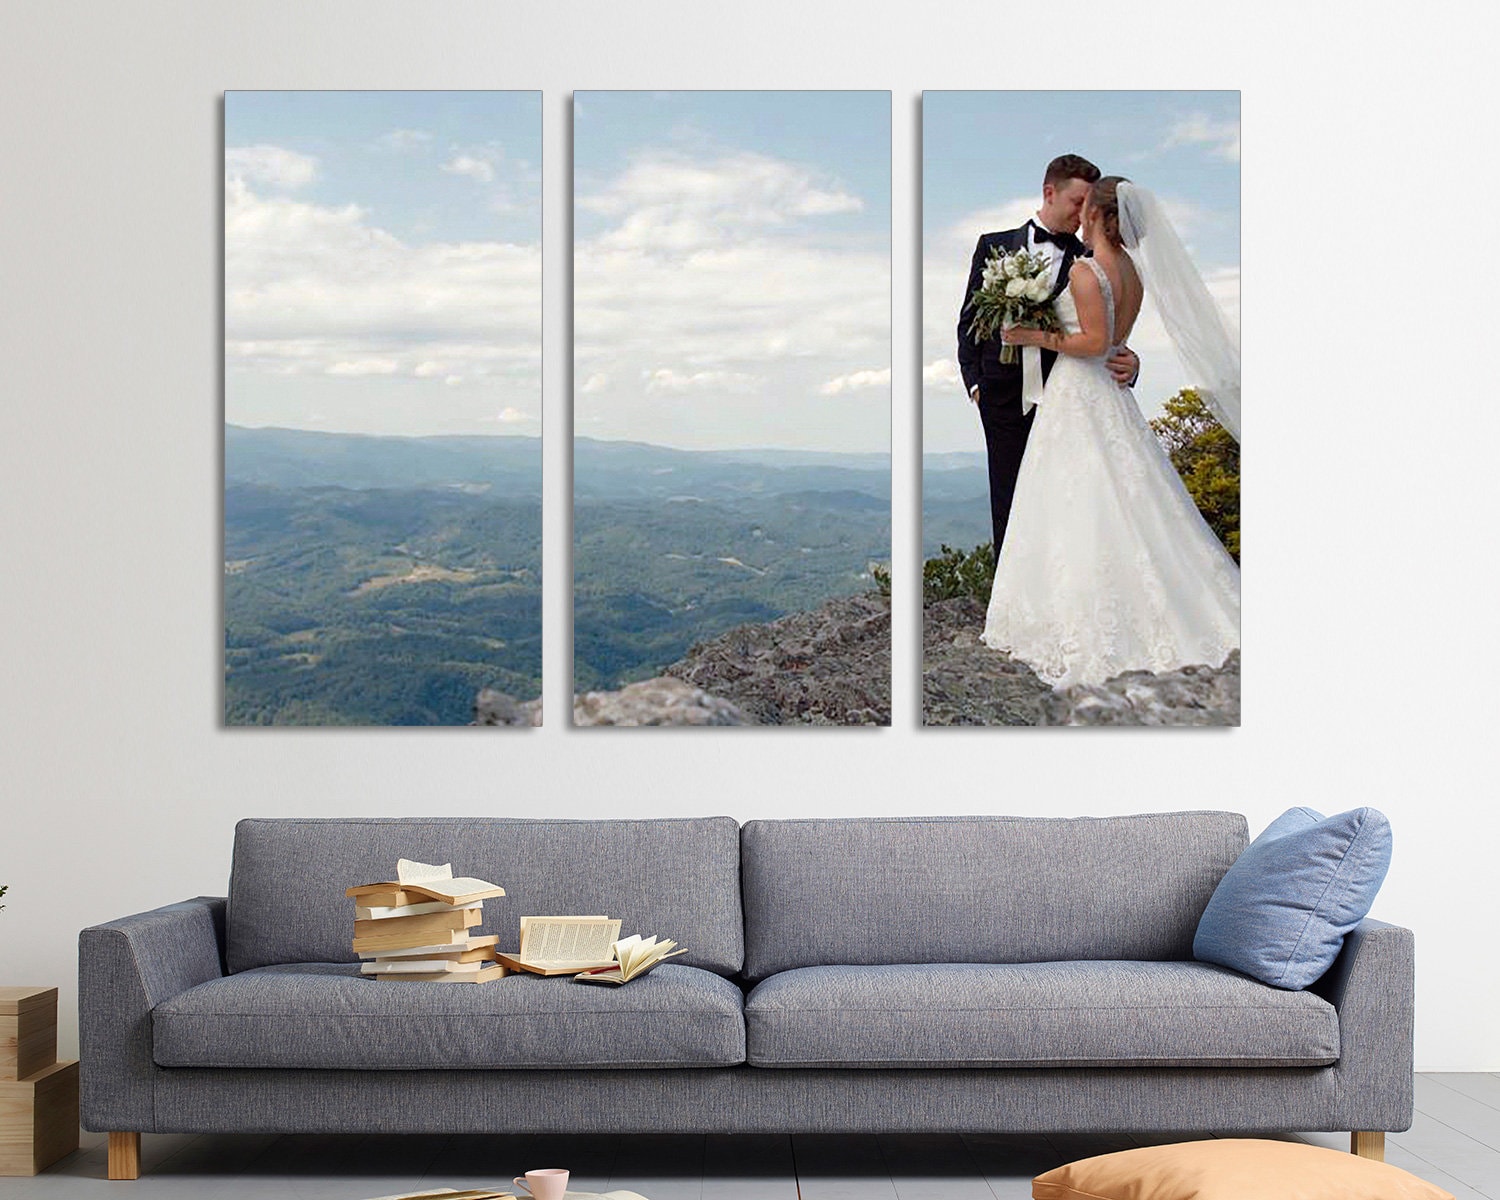 Hwyuqiya Personalized Custom Canvas Prints with Your Photo, 3 Panel Frame Wall Art Set, Print Pictures Photos on Canvas, Gifts for Family, Wedding